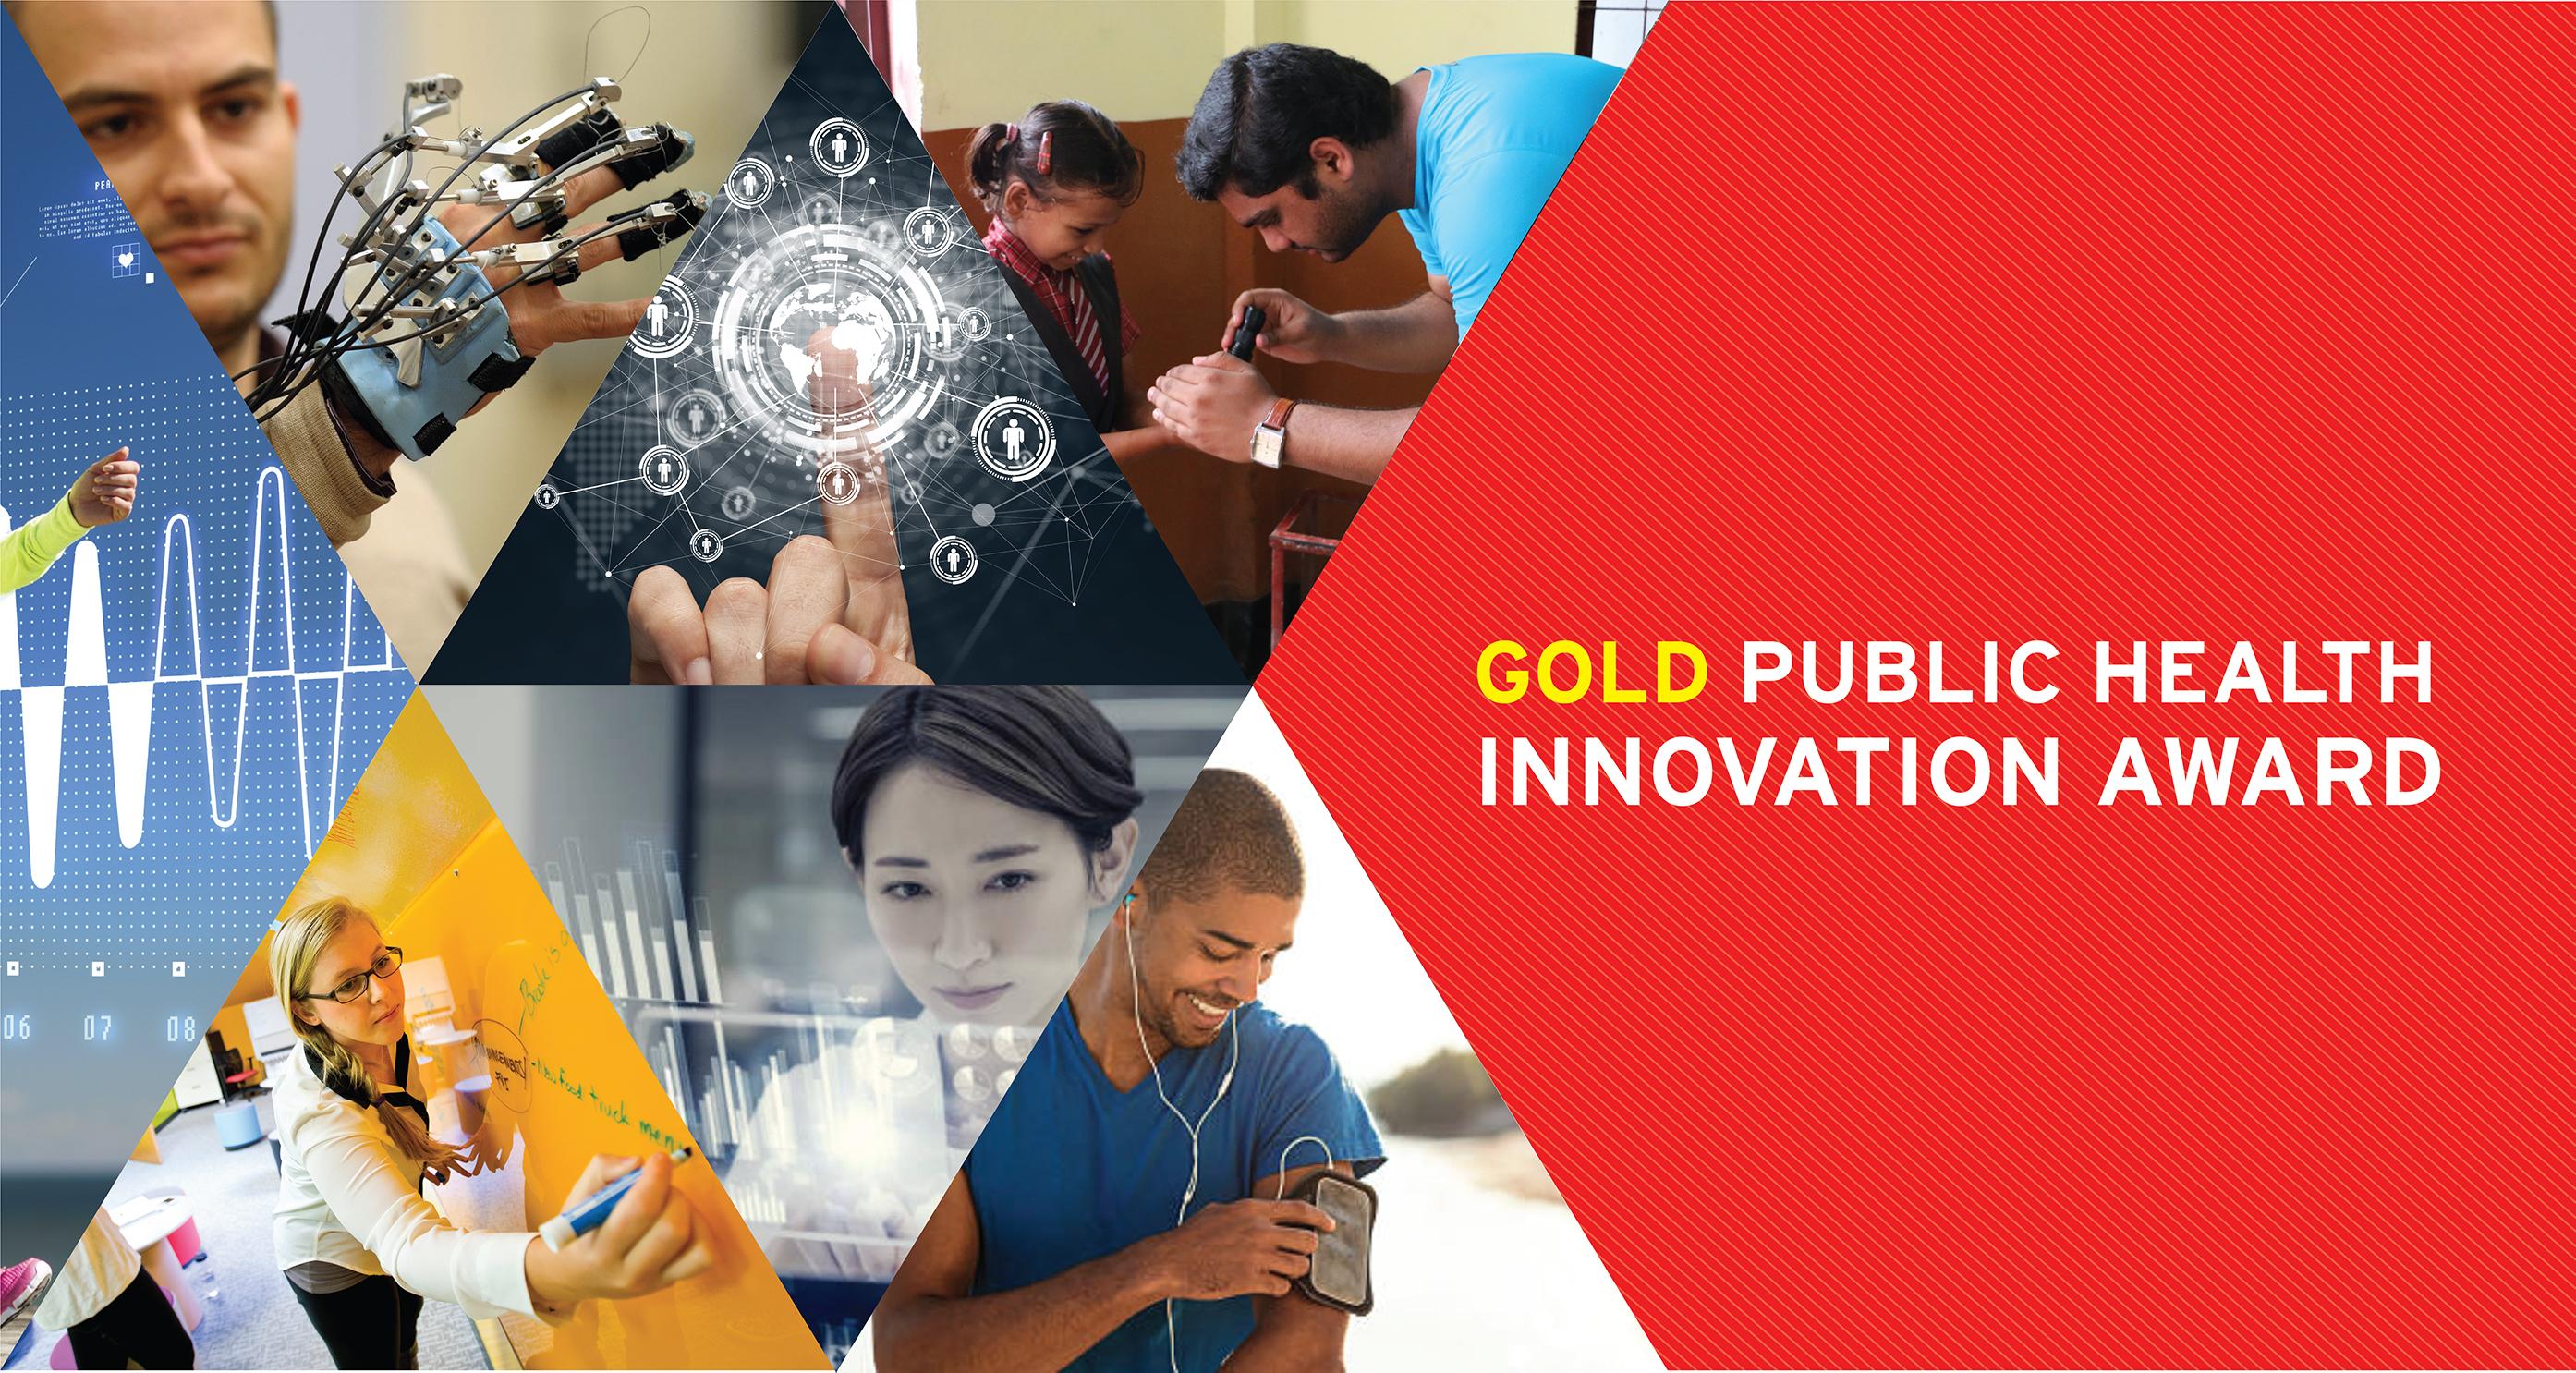 The Gold Public Health Innovation Award at the University of Maryland